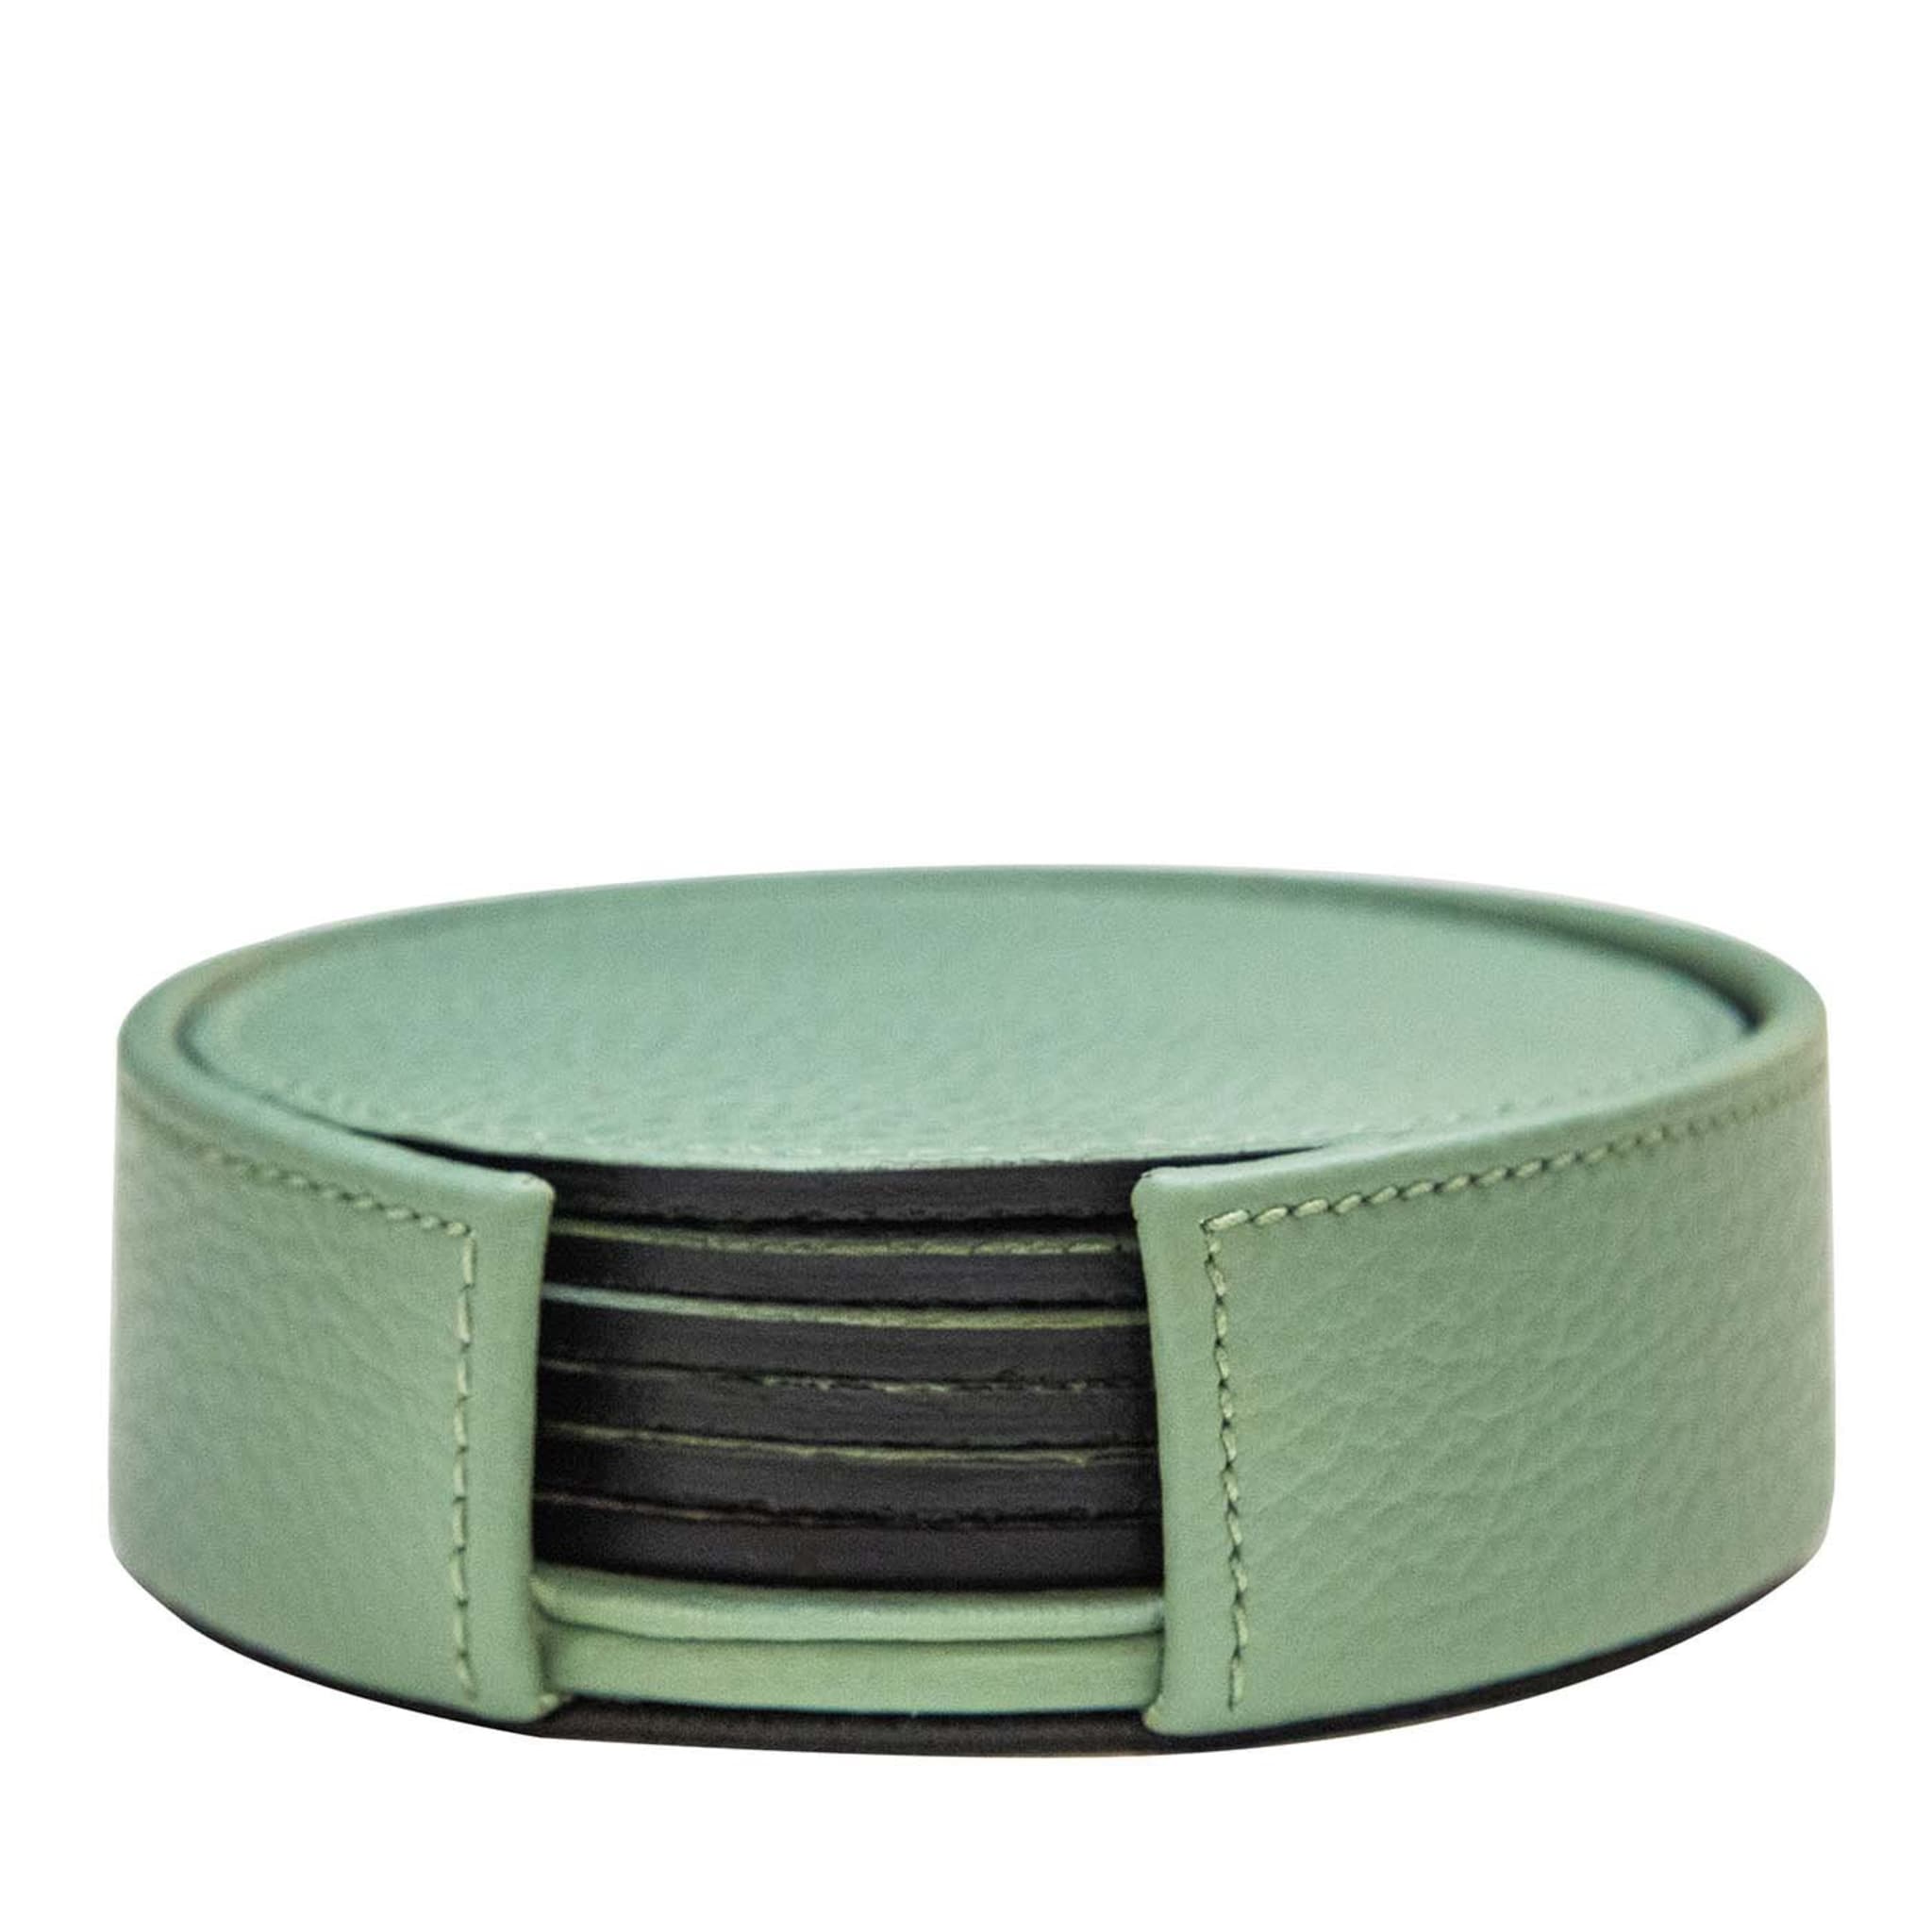 Set of 6 Leather Coasters in Sage Green - Main view